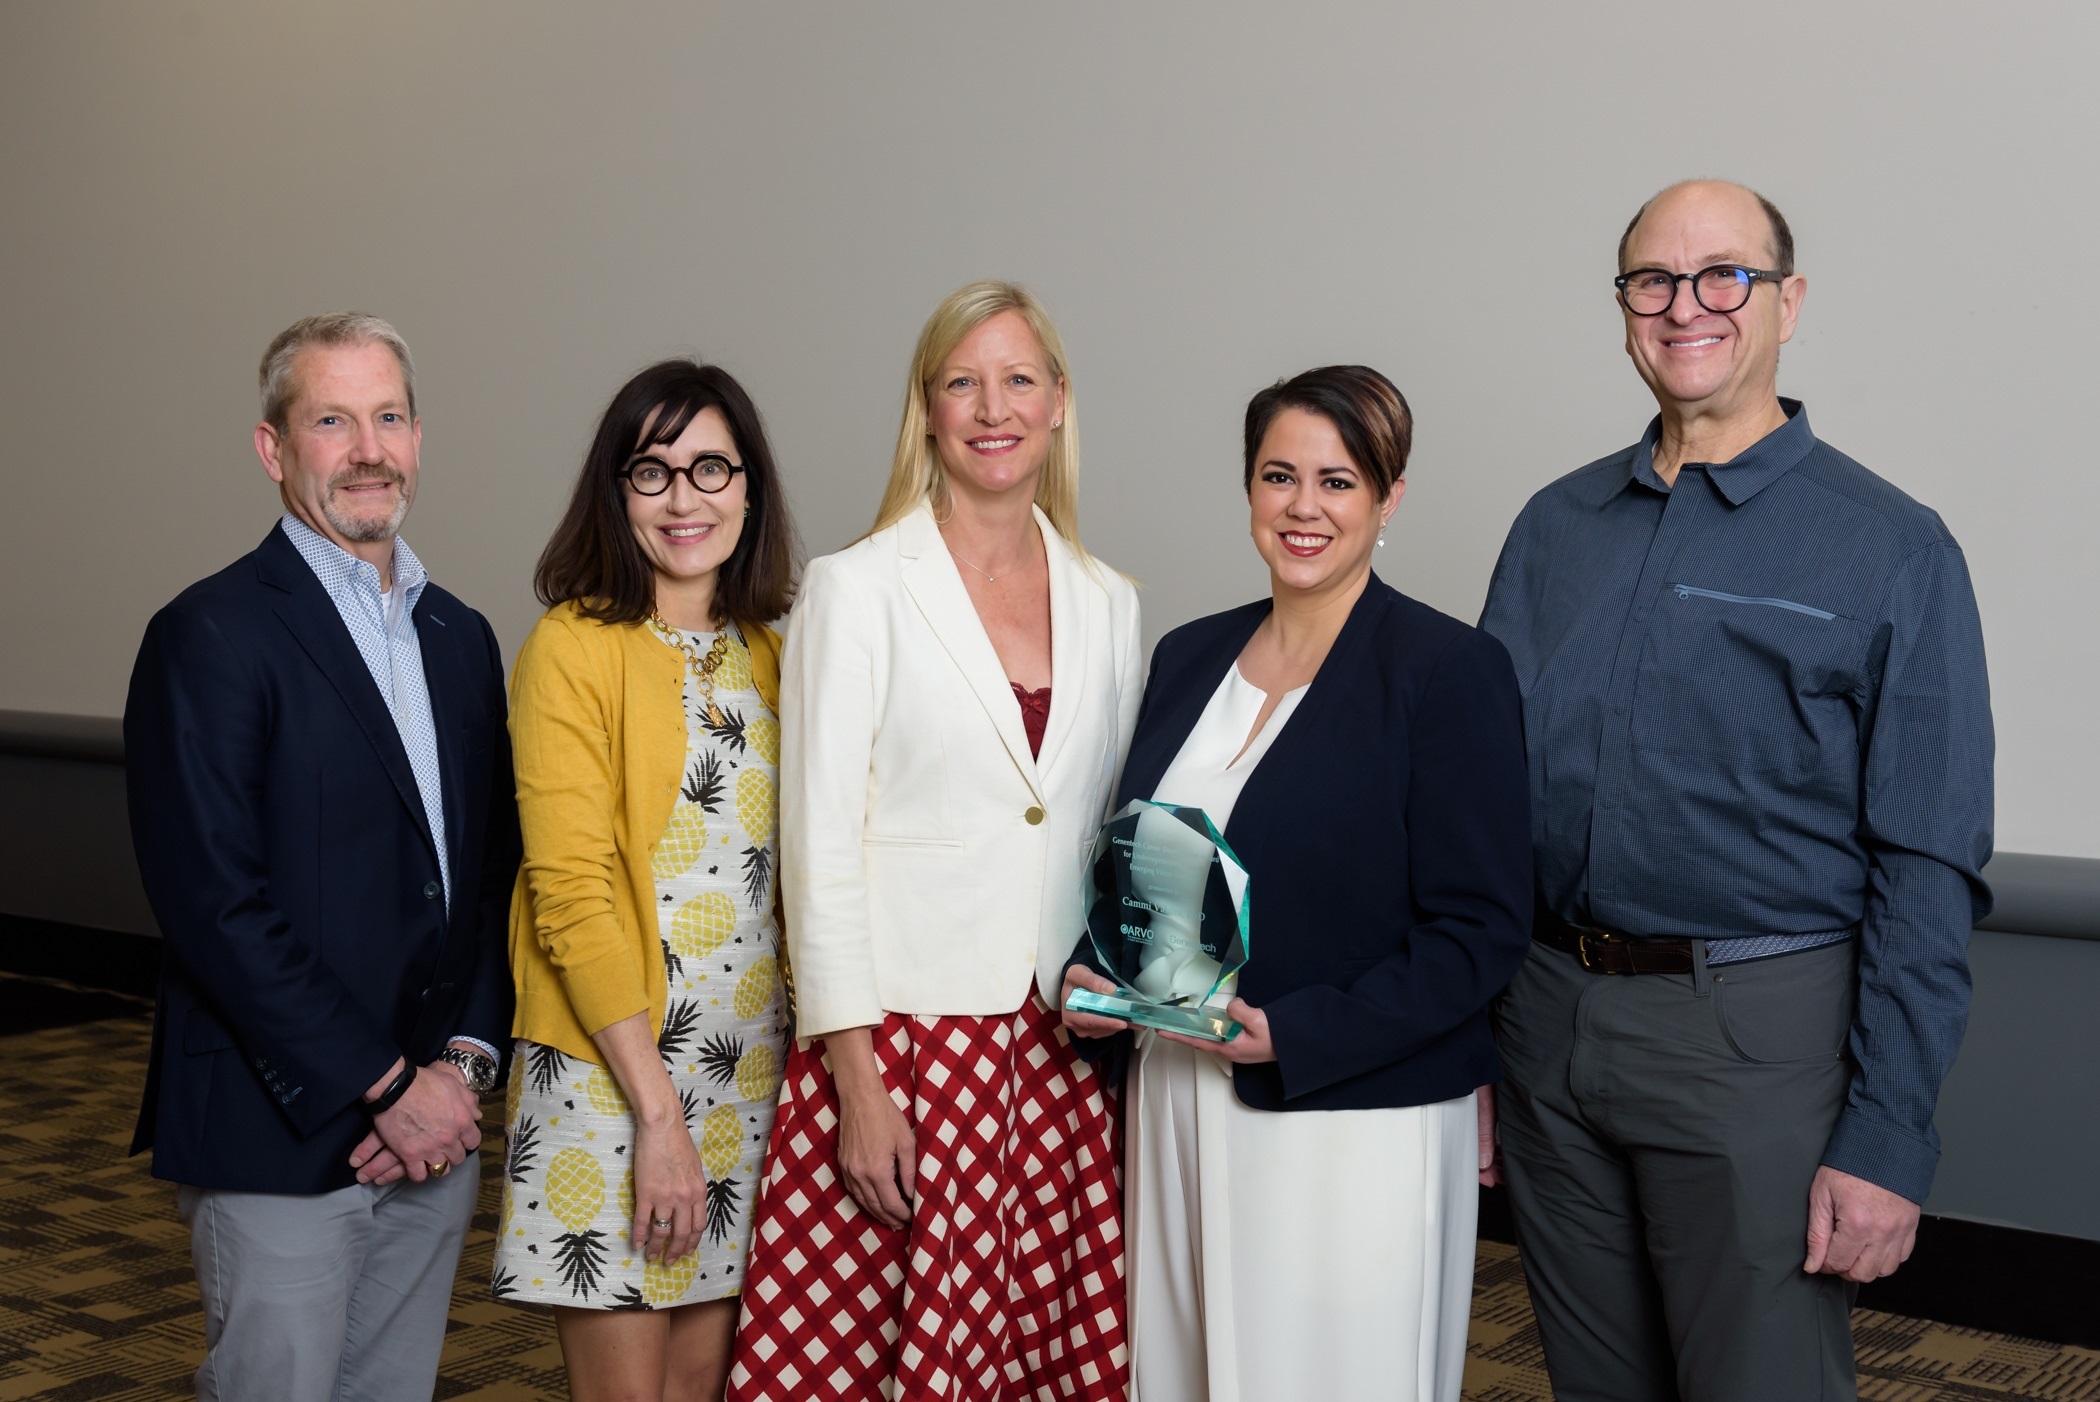 Dr. Valdez (2nd from right) receiving the award includes Genentech sponsors: Dr. Matt Meldorf, Dr. Galin Spicer, and Dr. Kay Smarzinski (from left to right) as well as ARVO Foundation Board Chair, Dr. Joel Schuman (far right)